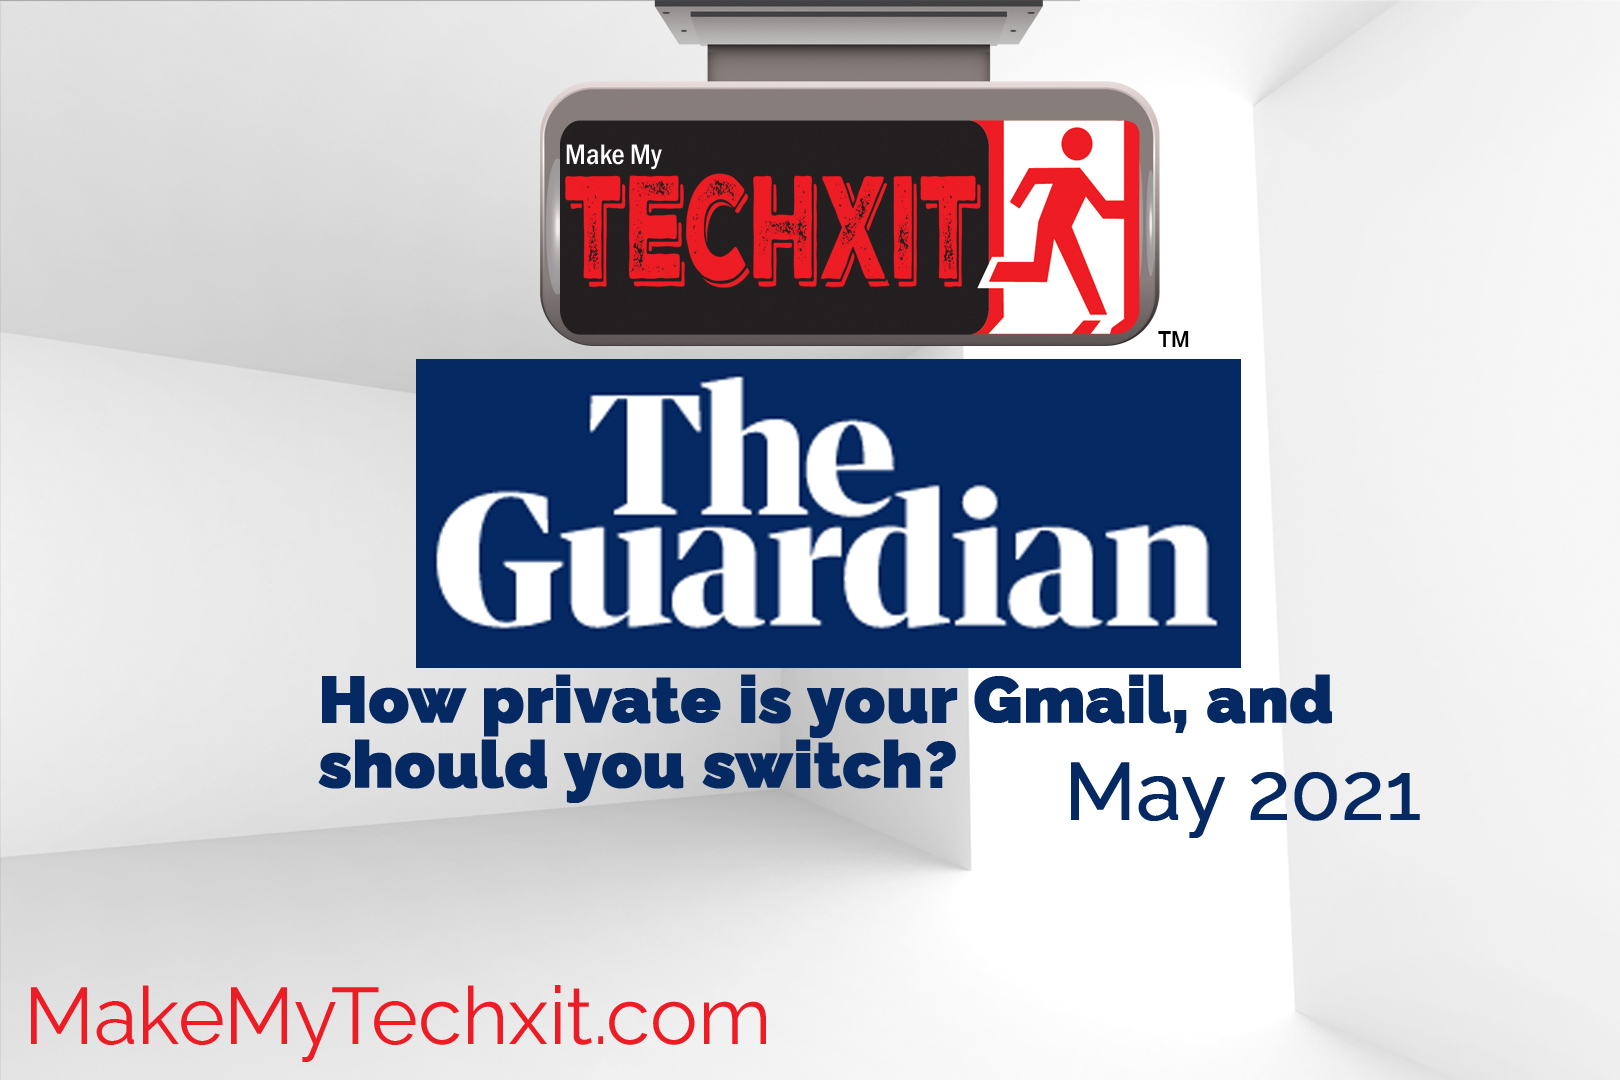 https://www.theguardian.com/technology/2021/may/09/how-private-is-your-gmail-and-should-you-switch